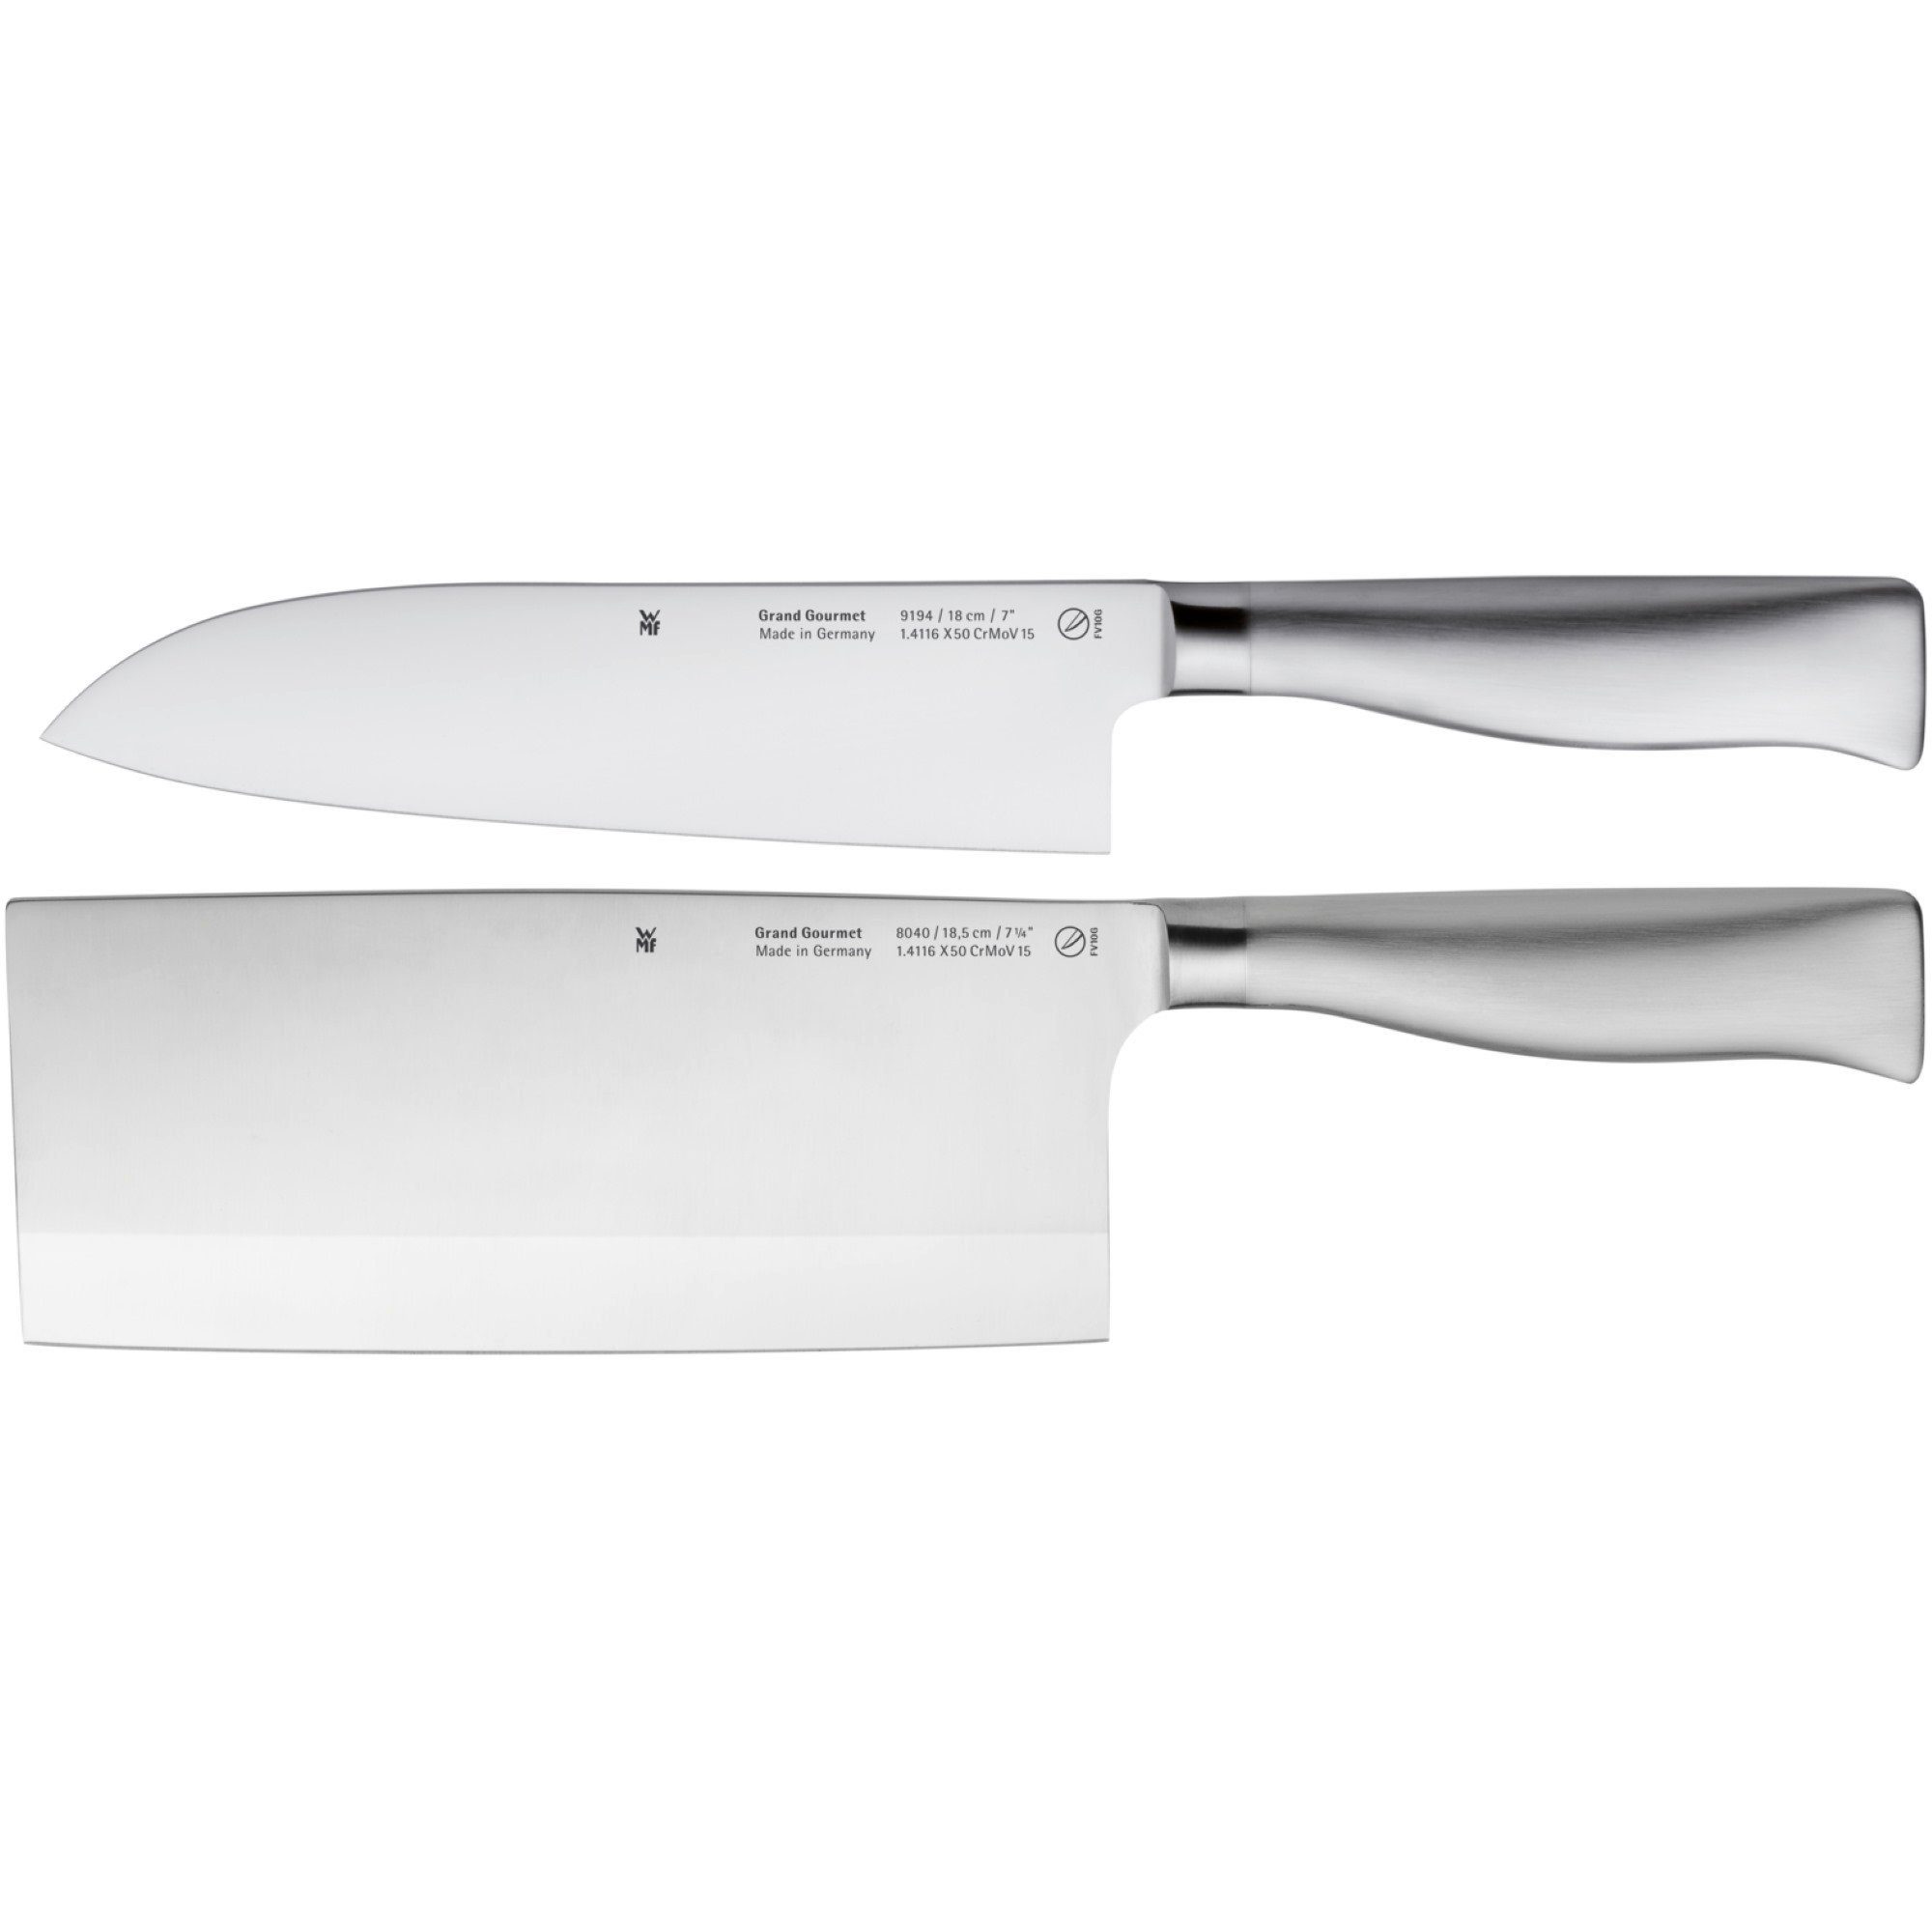 Messer-Set (Set, Made Grand in Gourmet Asia WMF Messerset, 2-tlg), Germany